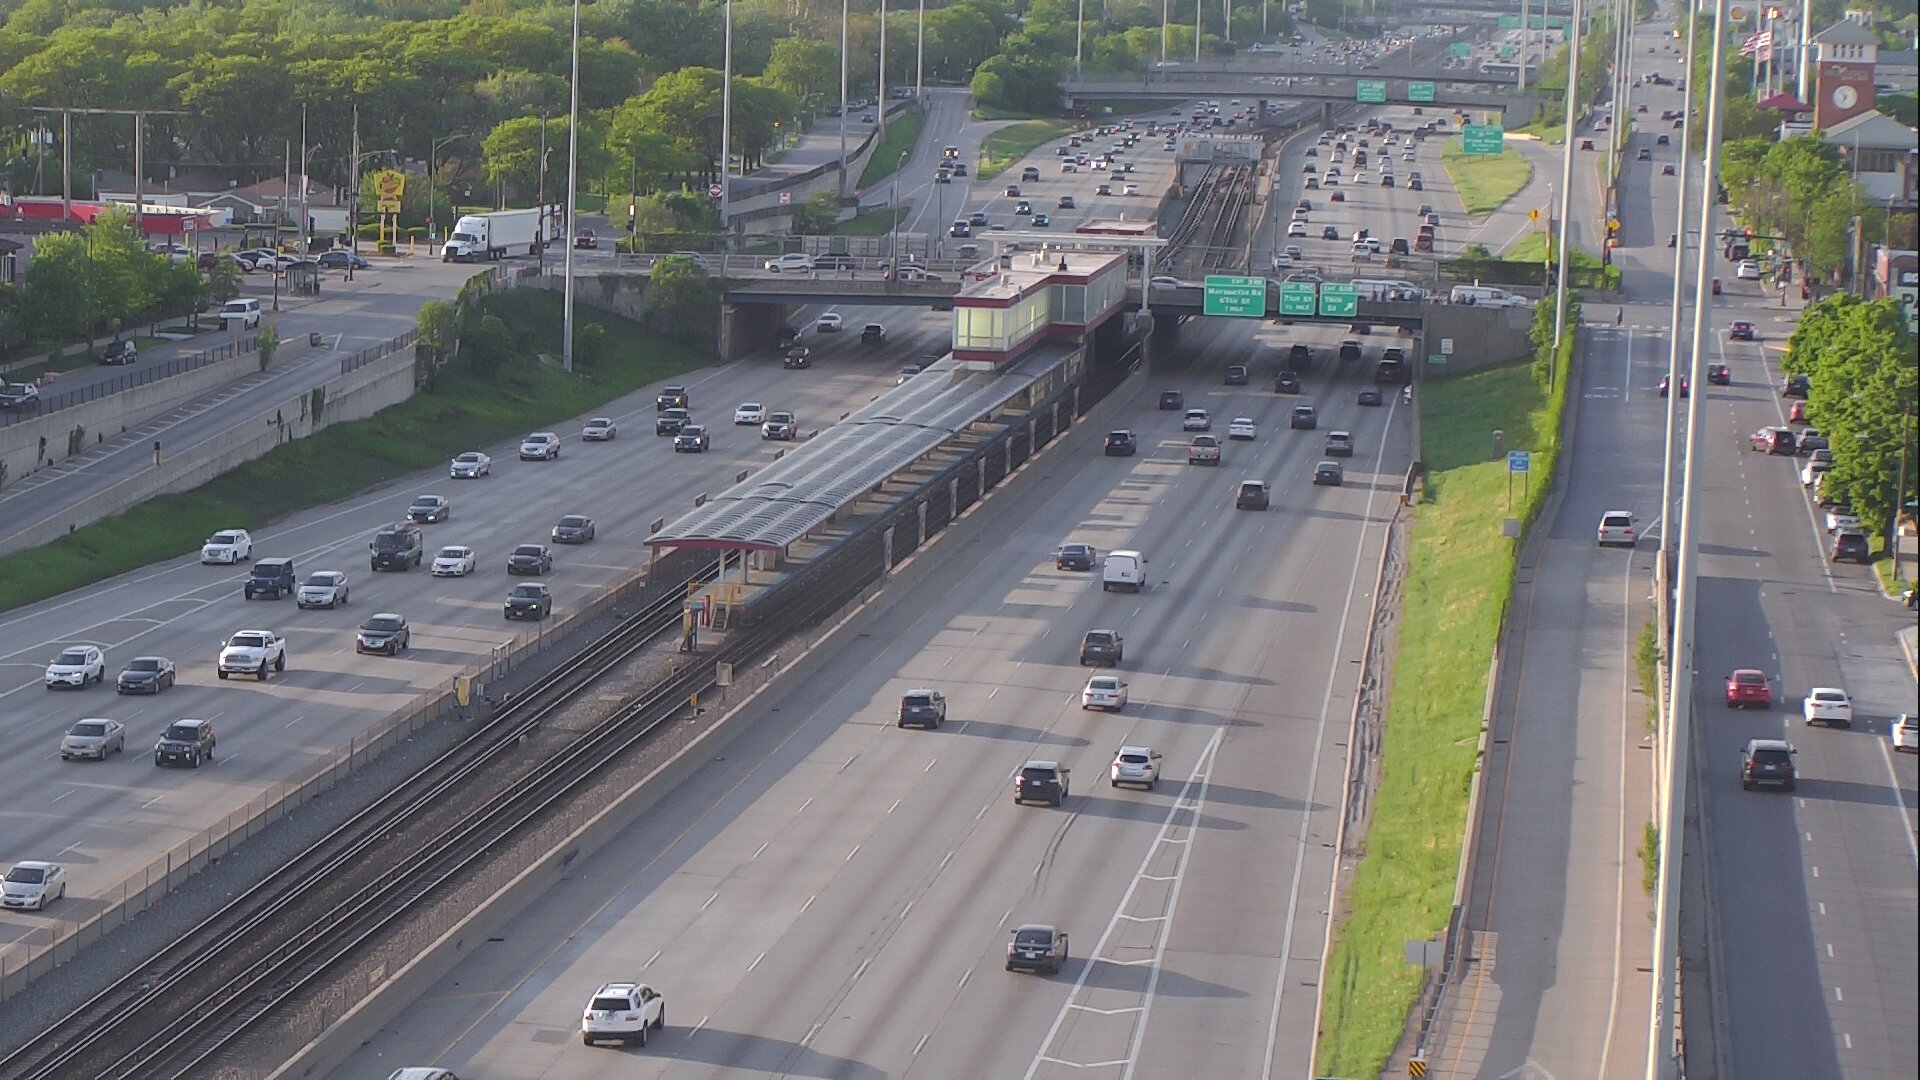 Dan Ryan at 81st St. 1 - Chicago and Illinois